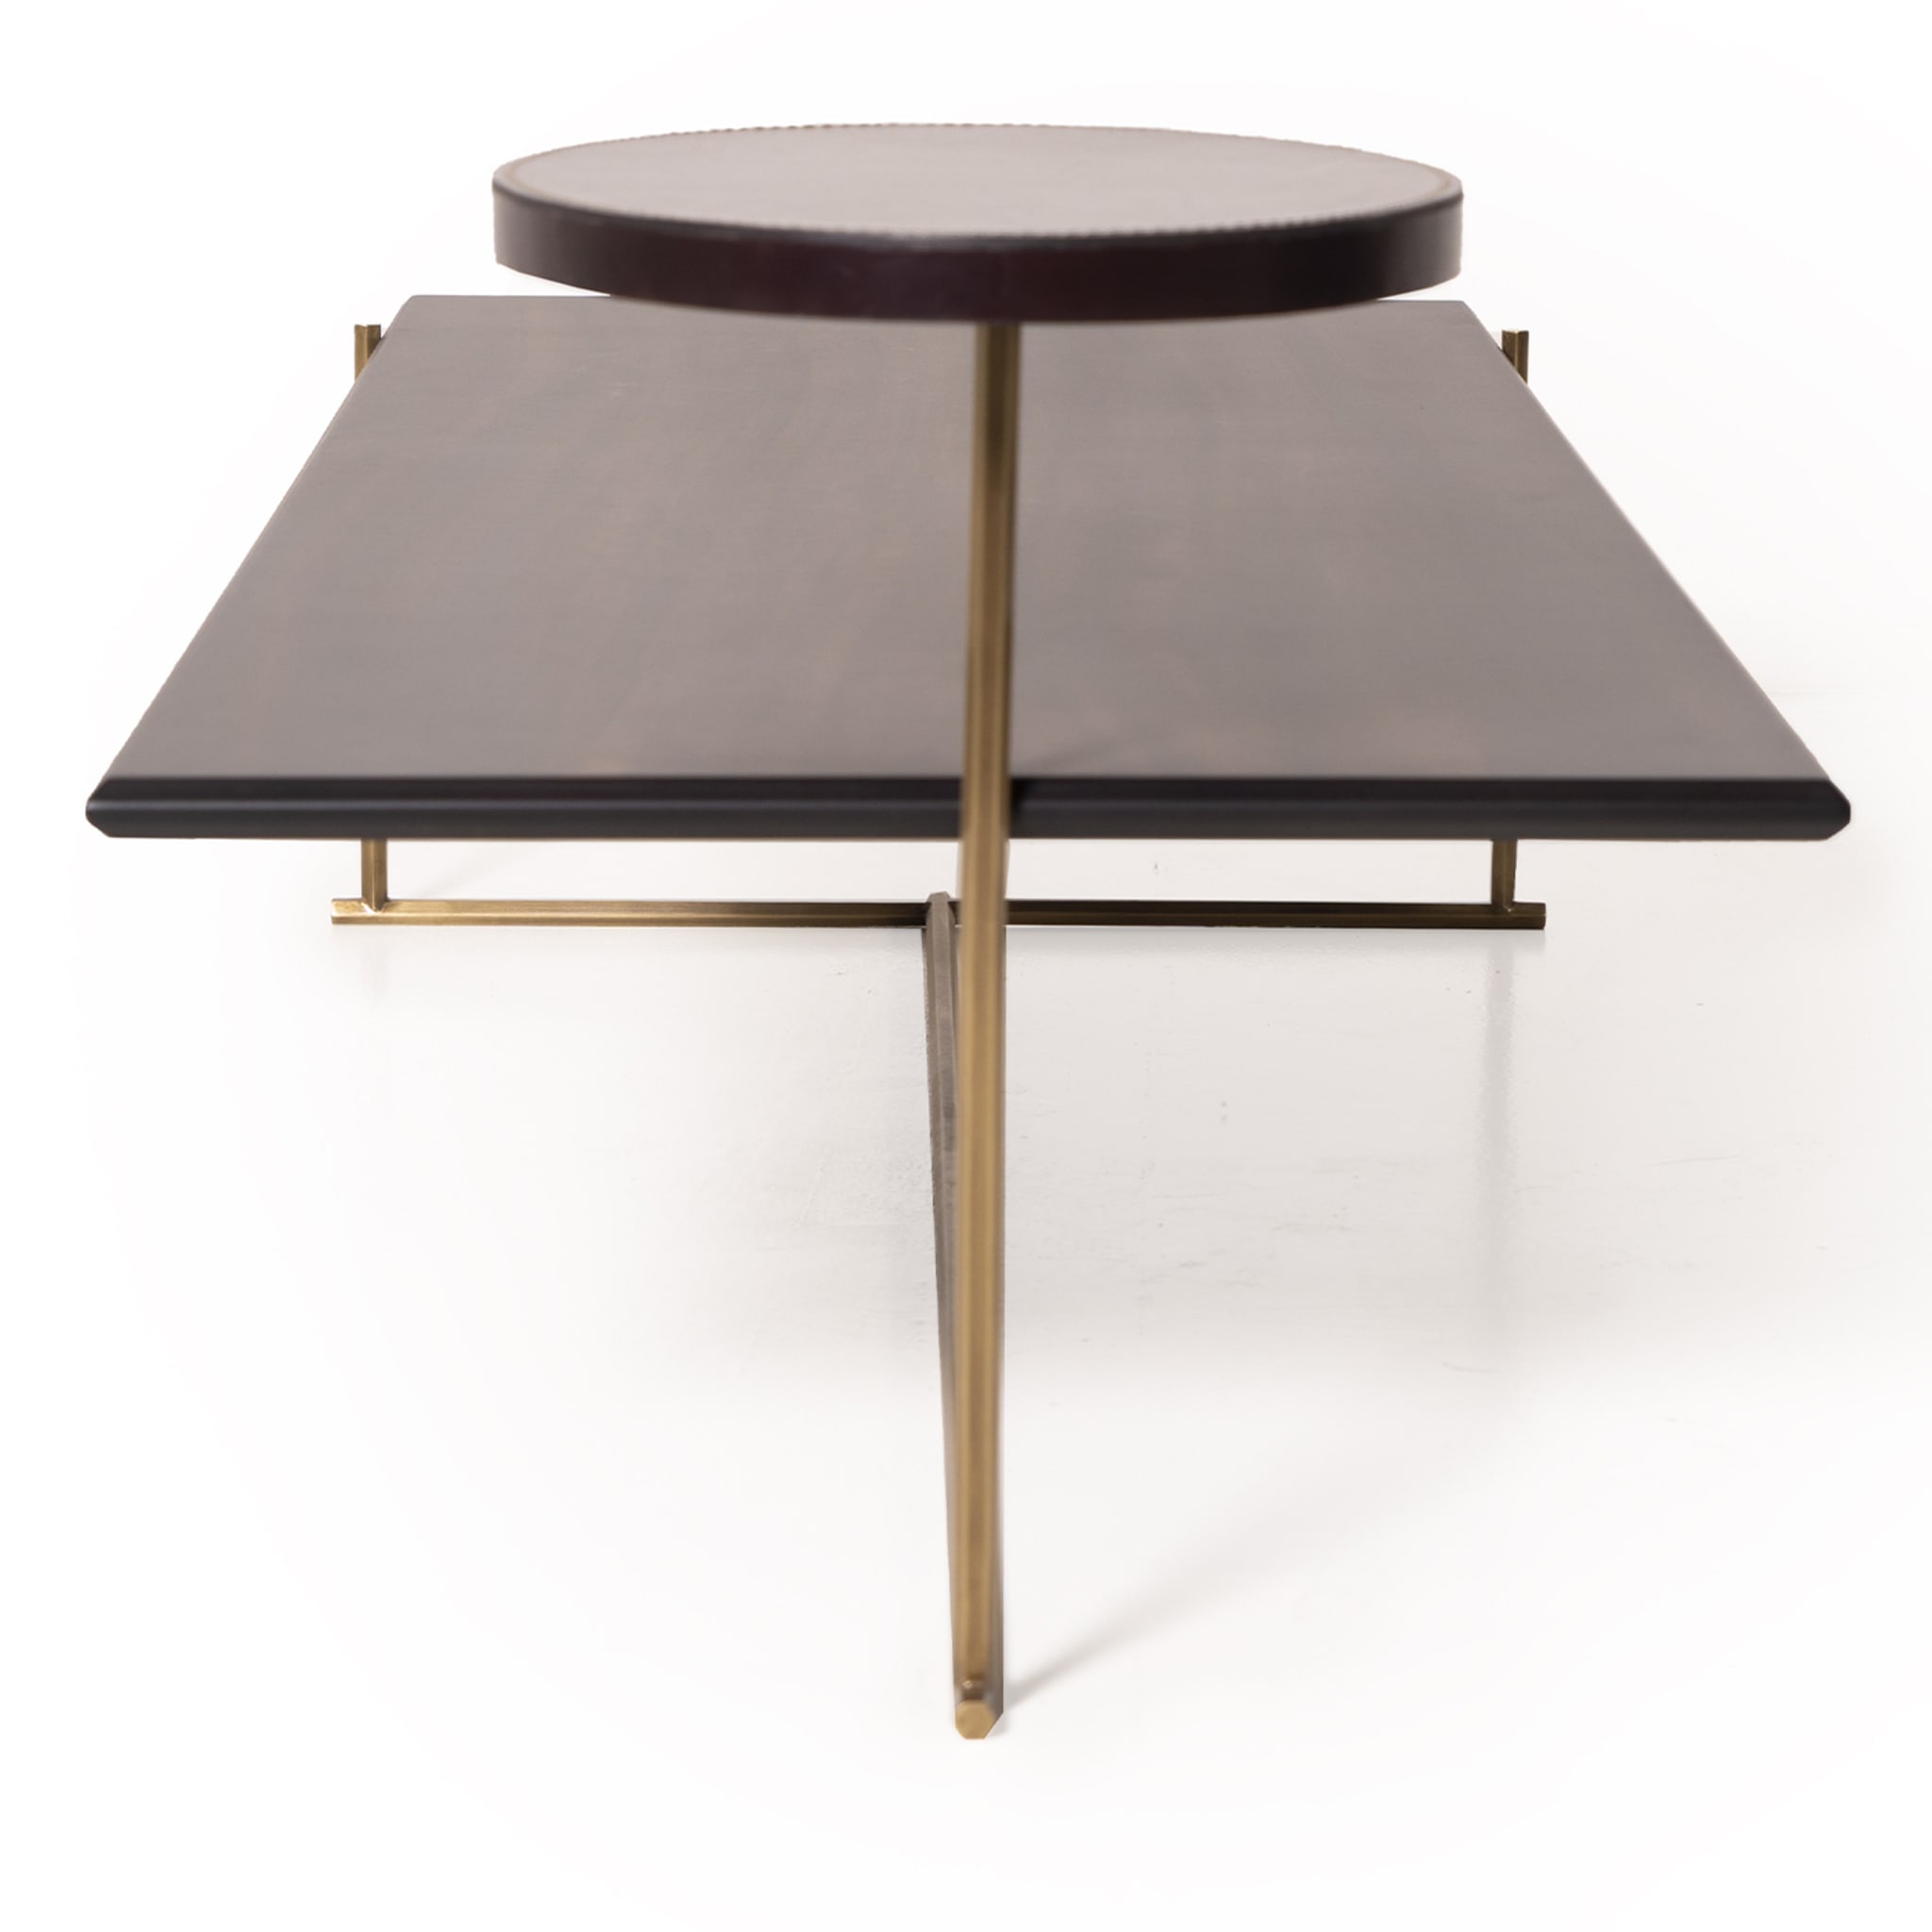 Skyline Coffee Table by Marco and Giulio Mantellassi - Alternative view 2